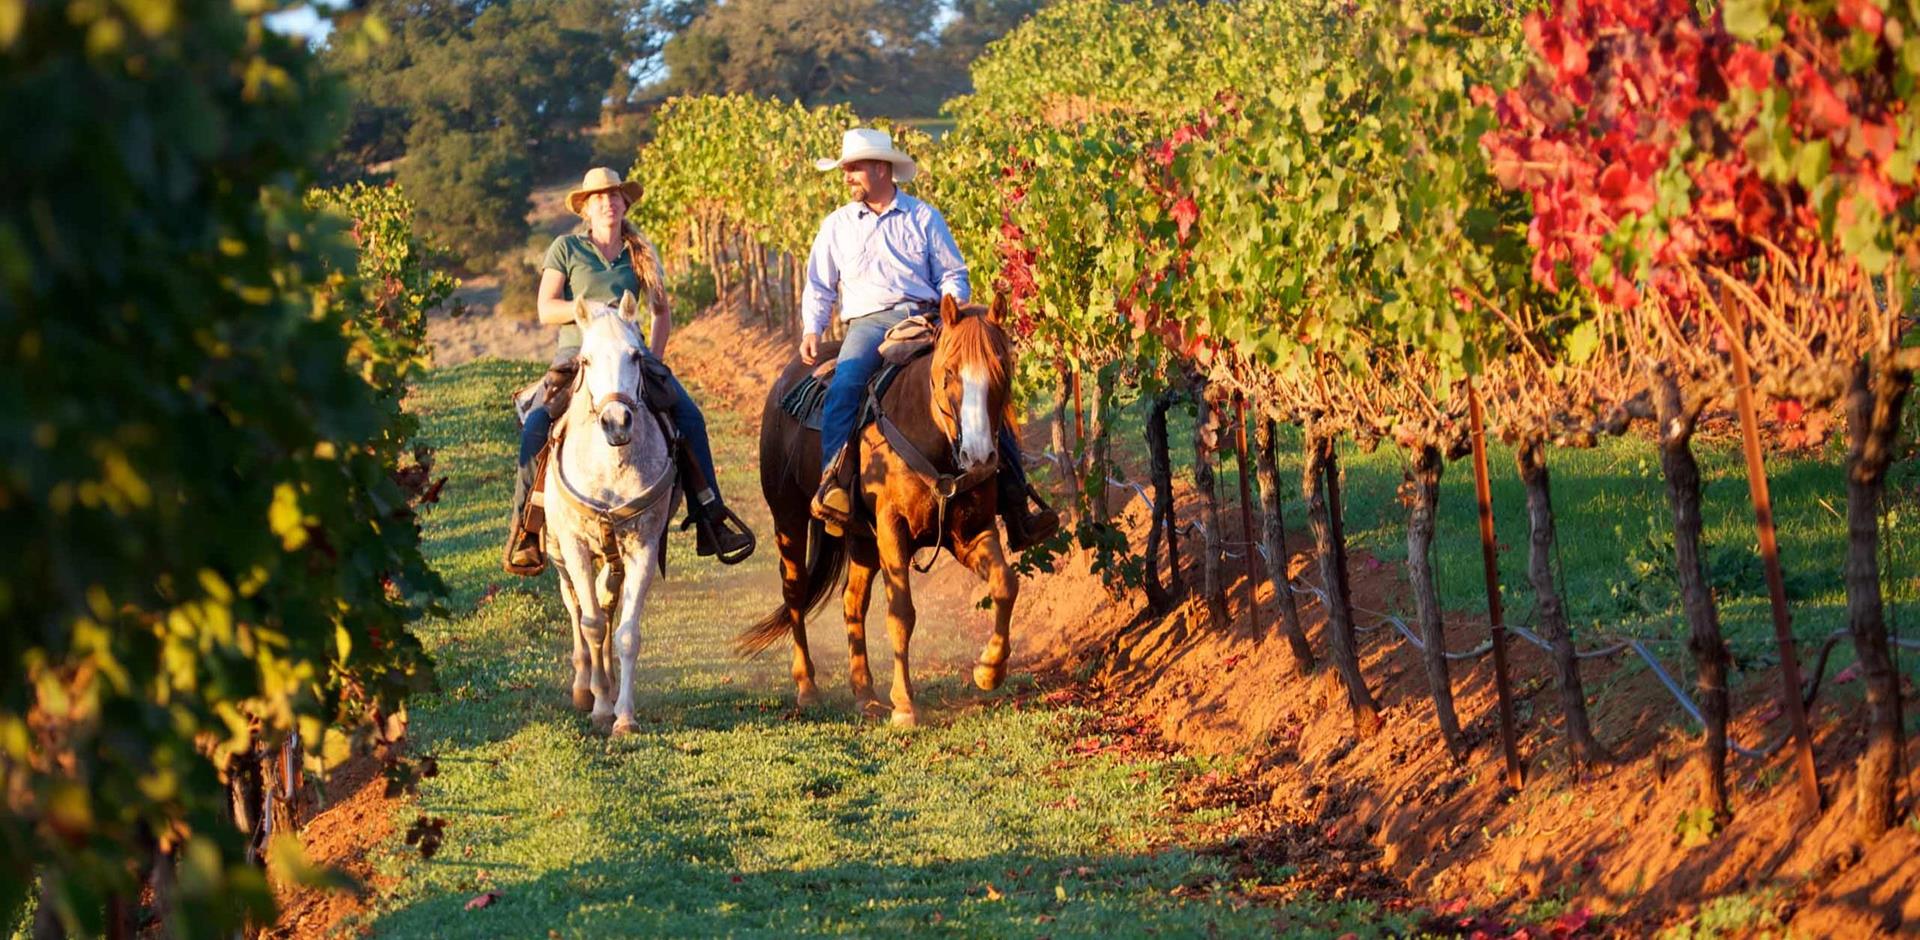 Horse riding and wine tasting